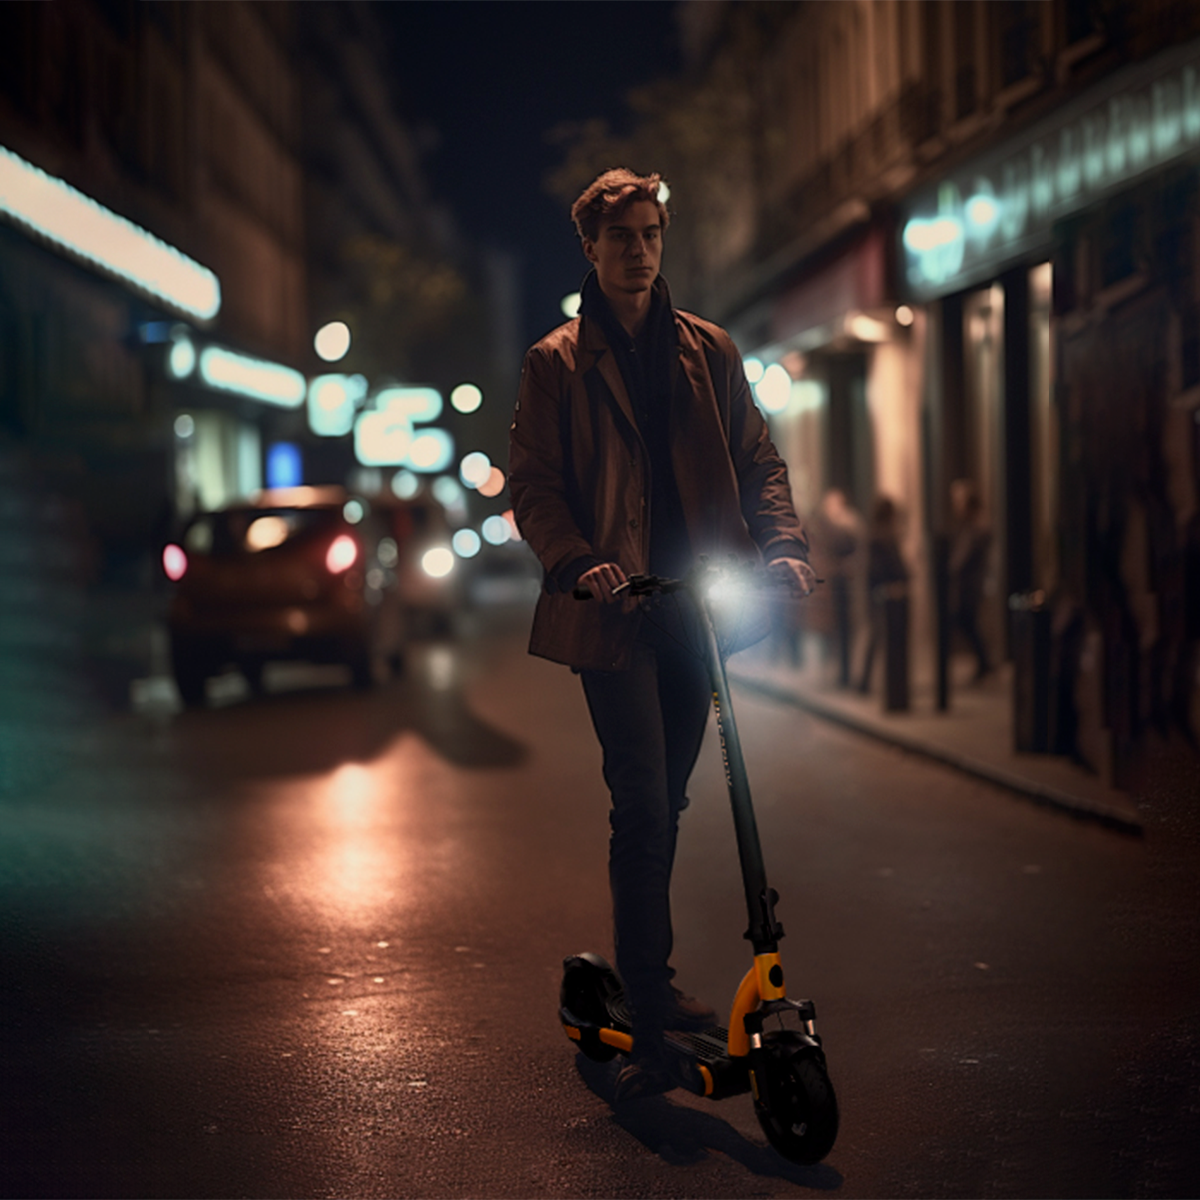 Off-Road 2 – Hikerboy Scooter